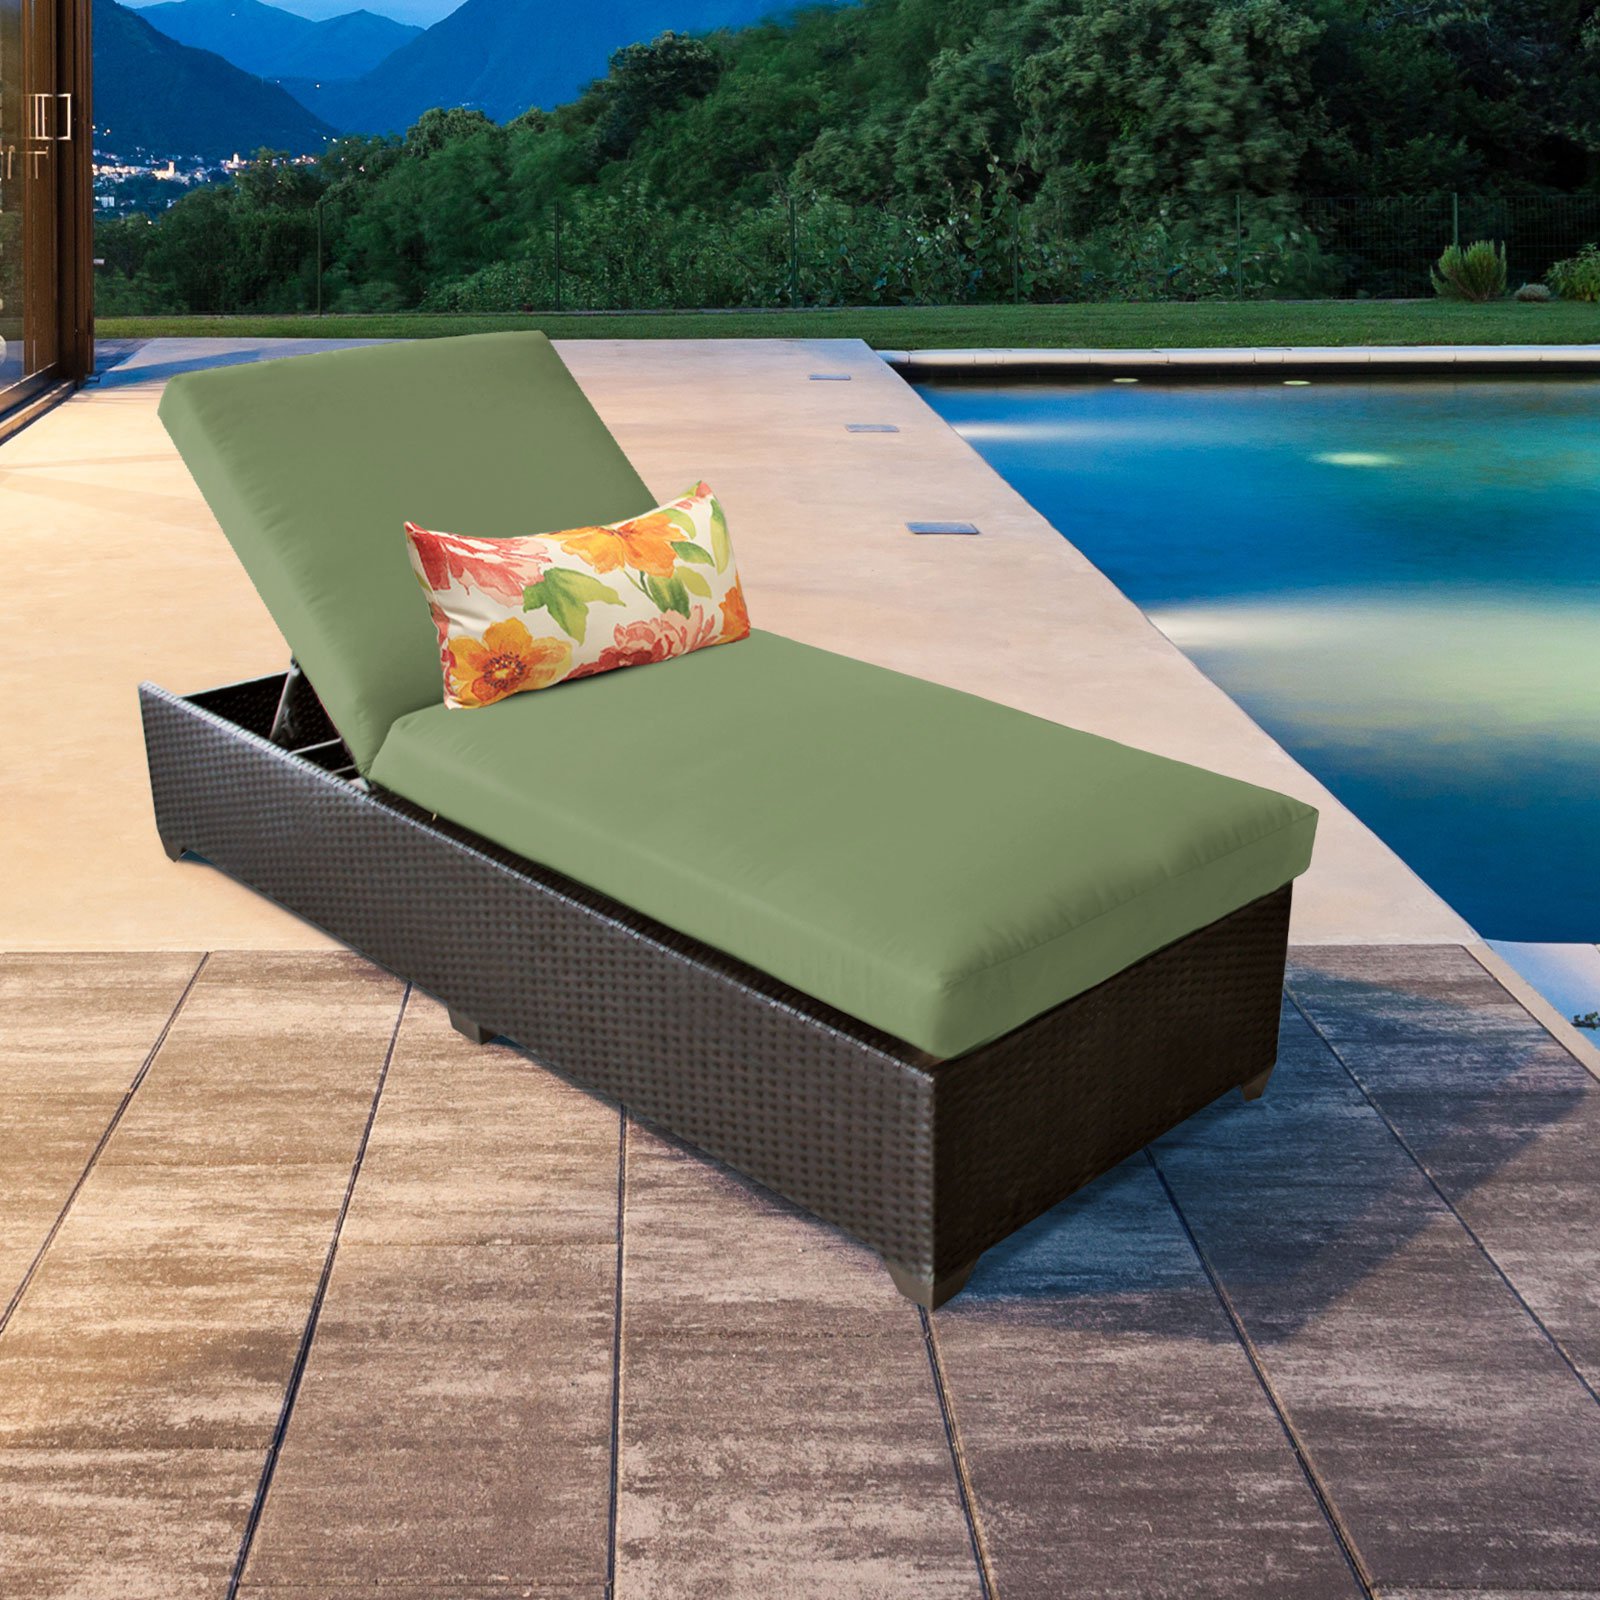 Barbados Chaise Set of 2 Outdoor Wicker Patio Furniture - image 4 of 10